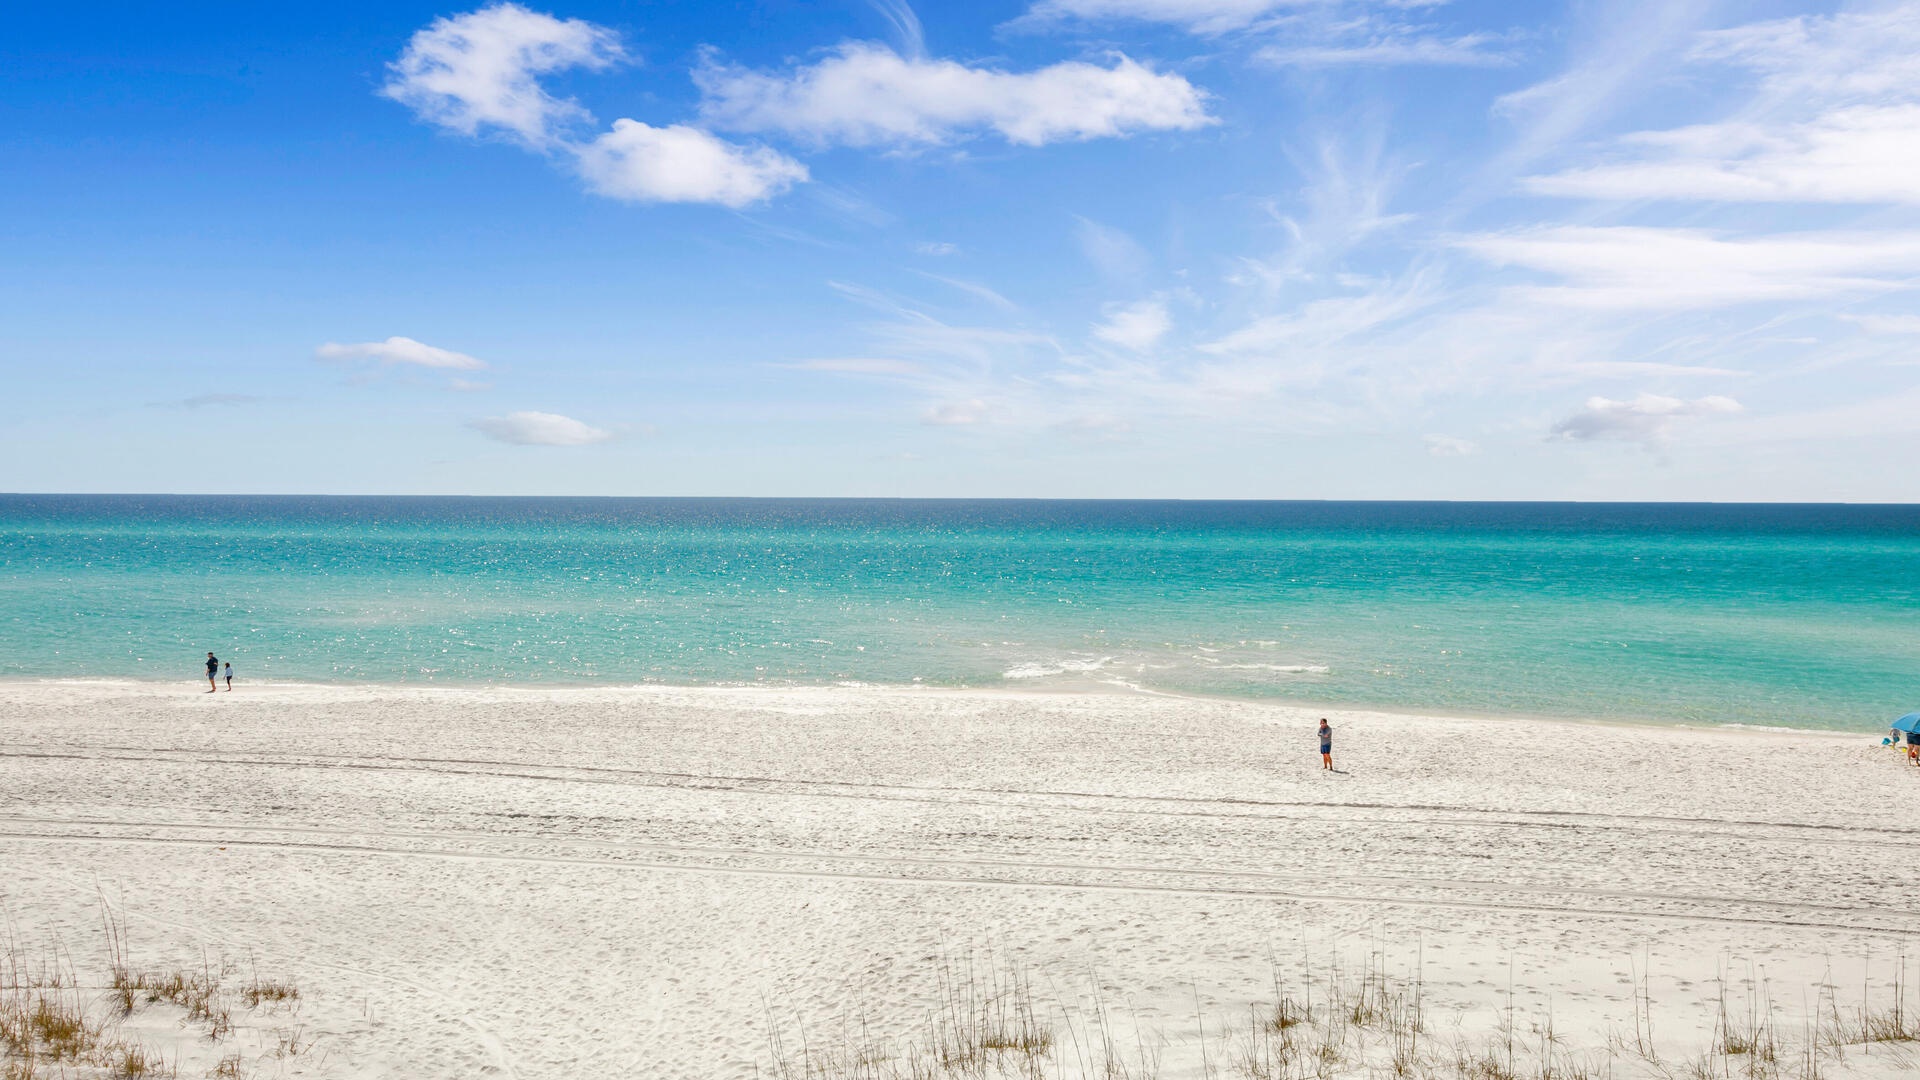 The sugar white sands and emerald waters of the Gulf Coast!